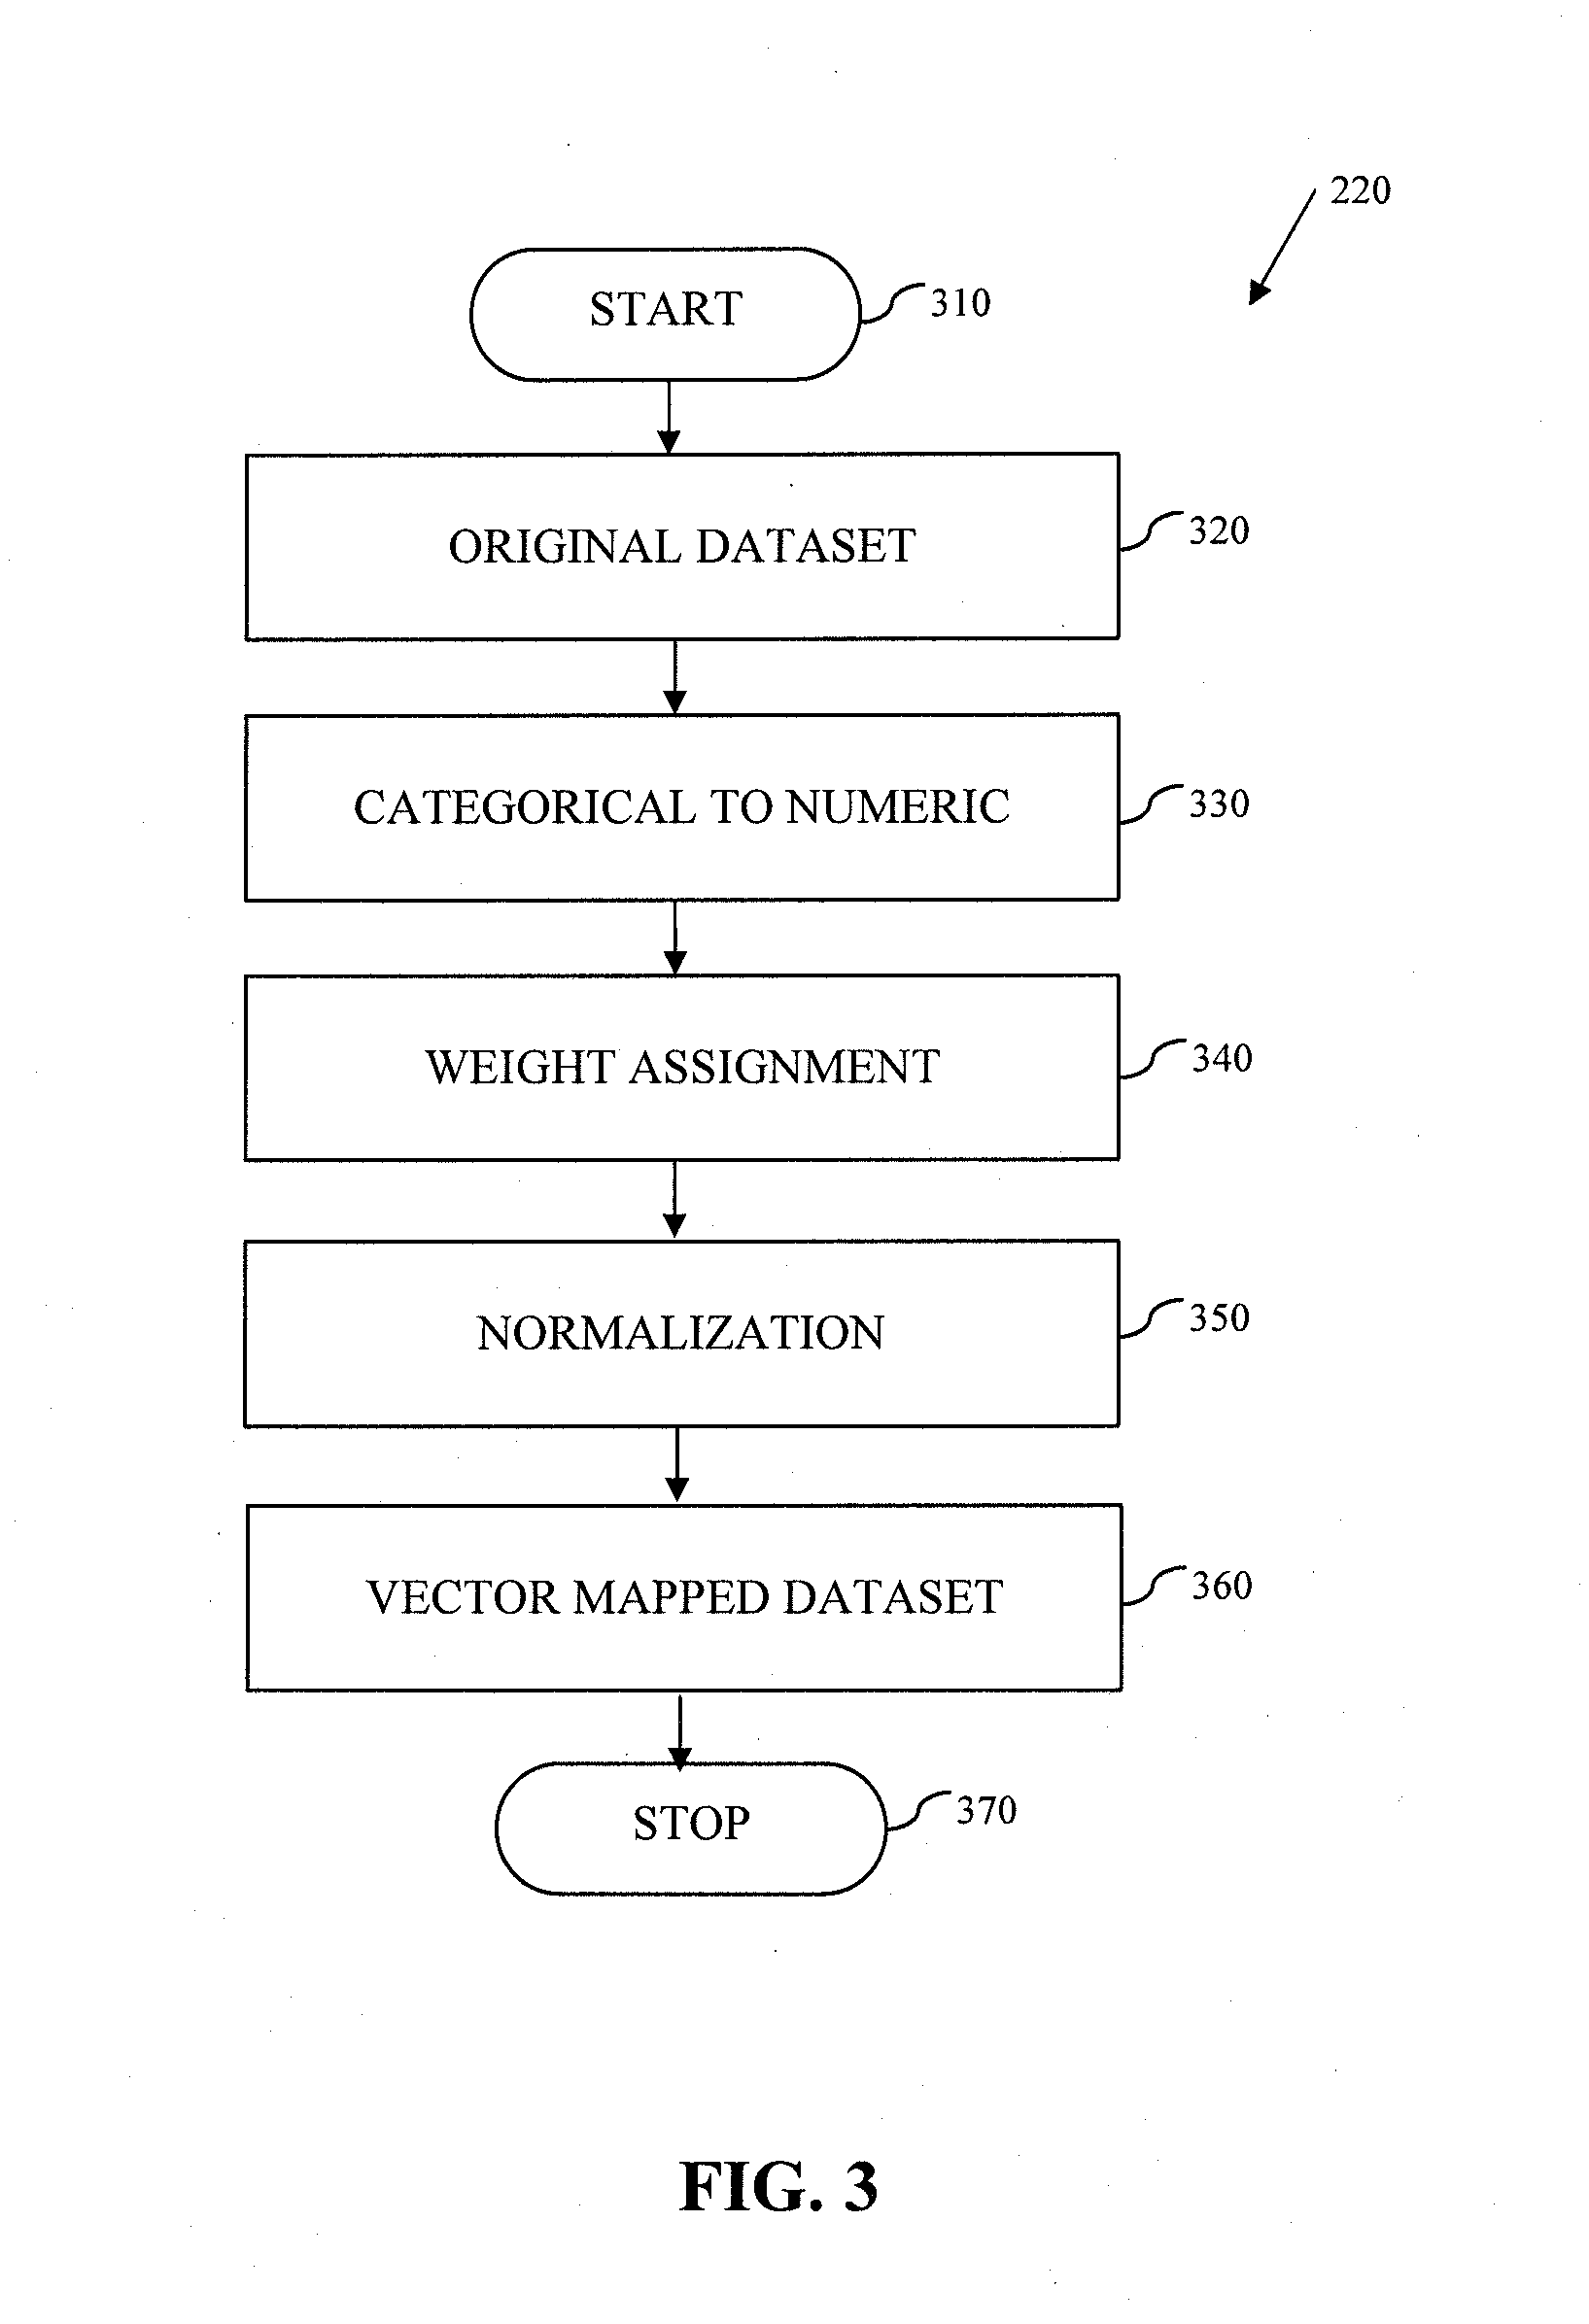 System and Method for Data Anonymization Using Hierarchical Data Clustering and Perturbation